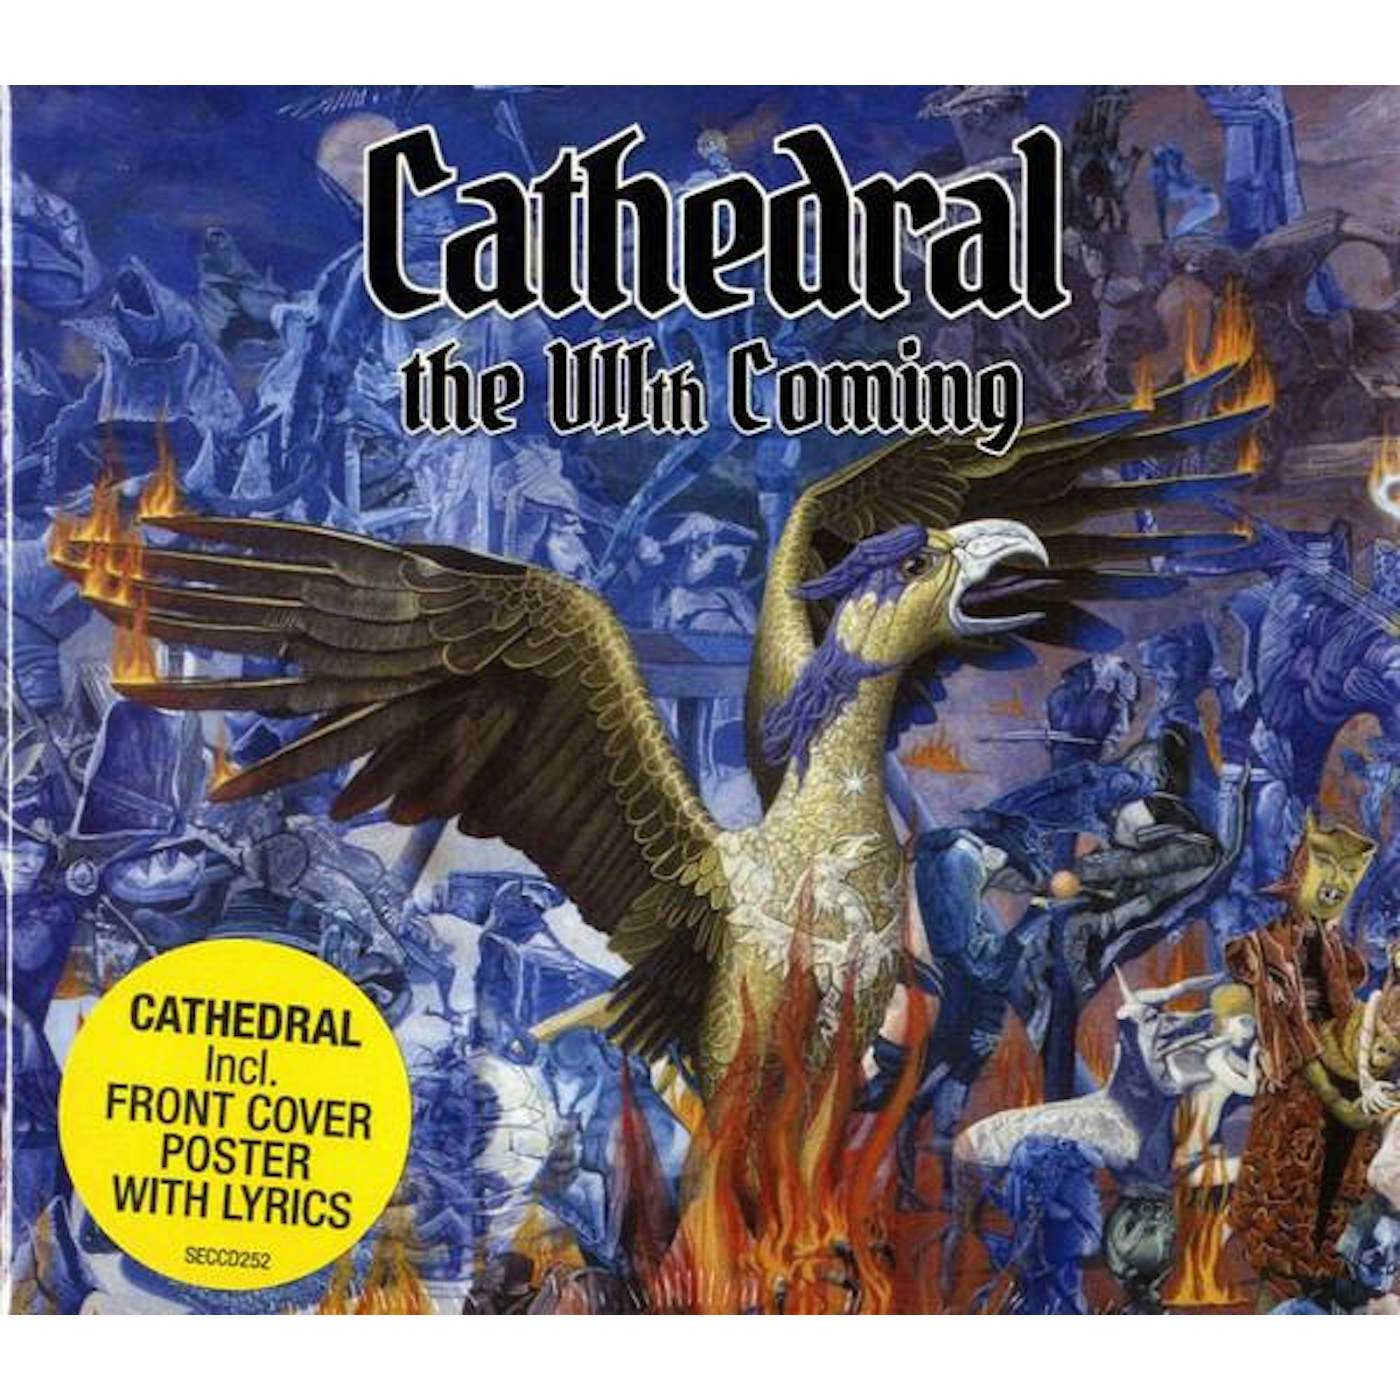 Cathedral VIITH COMING CD